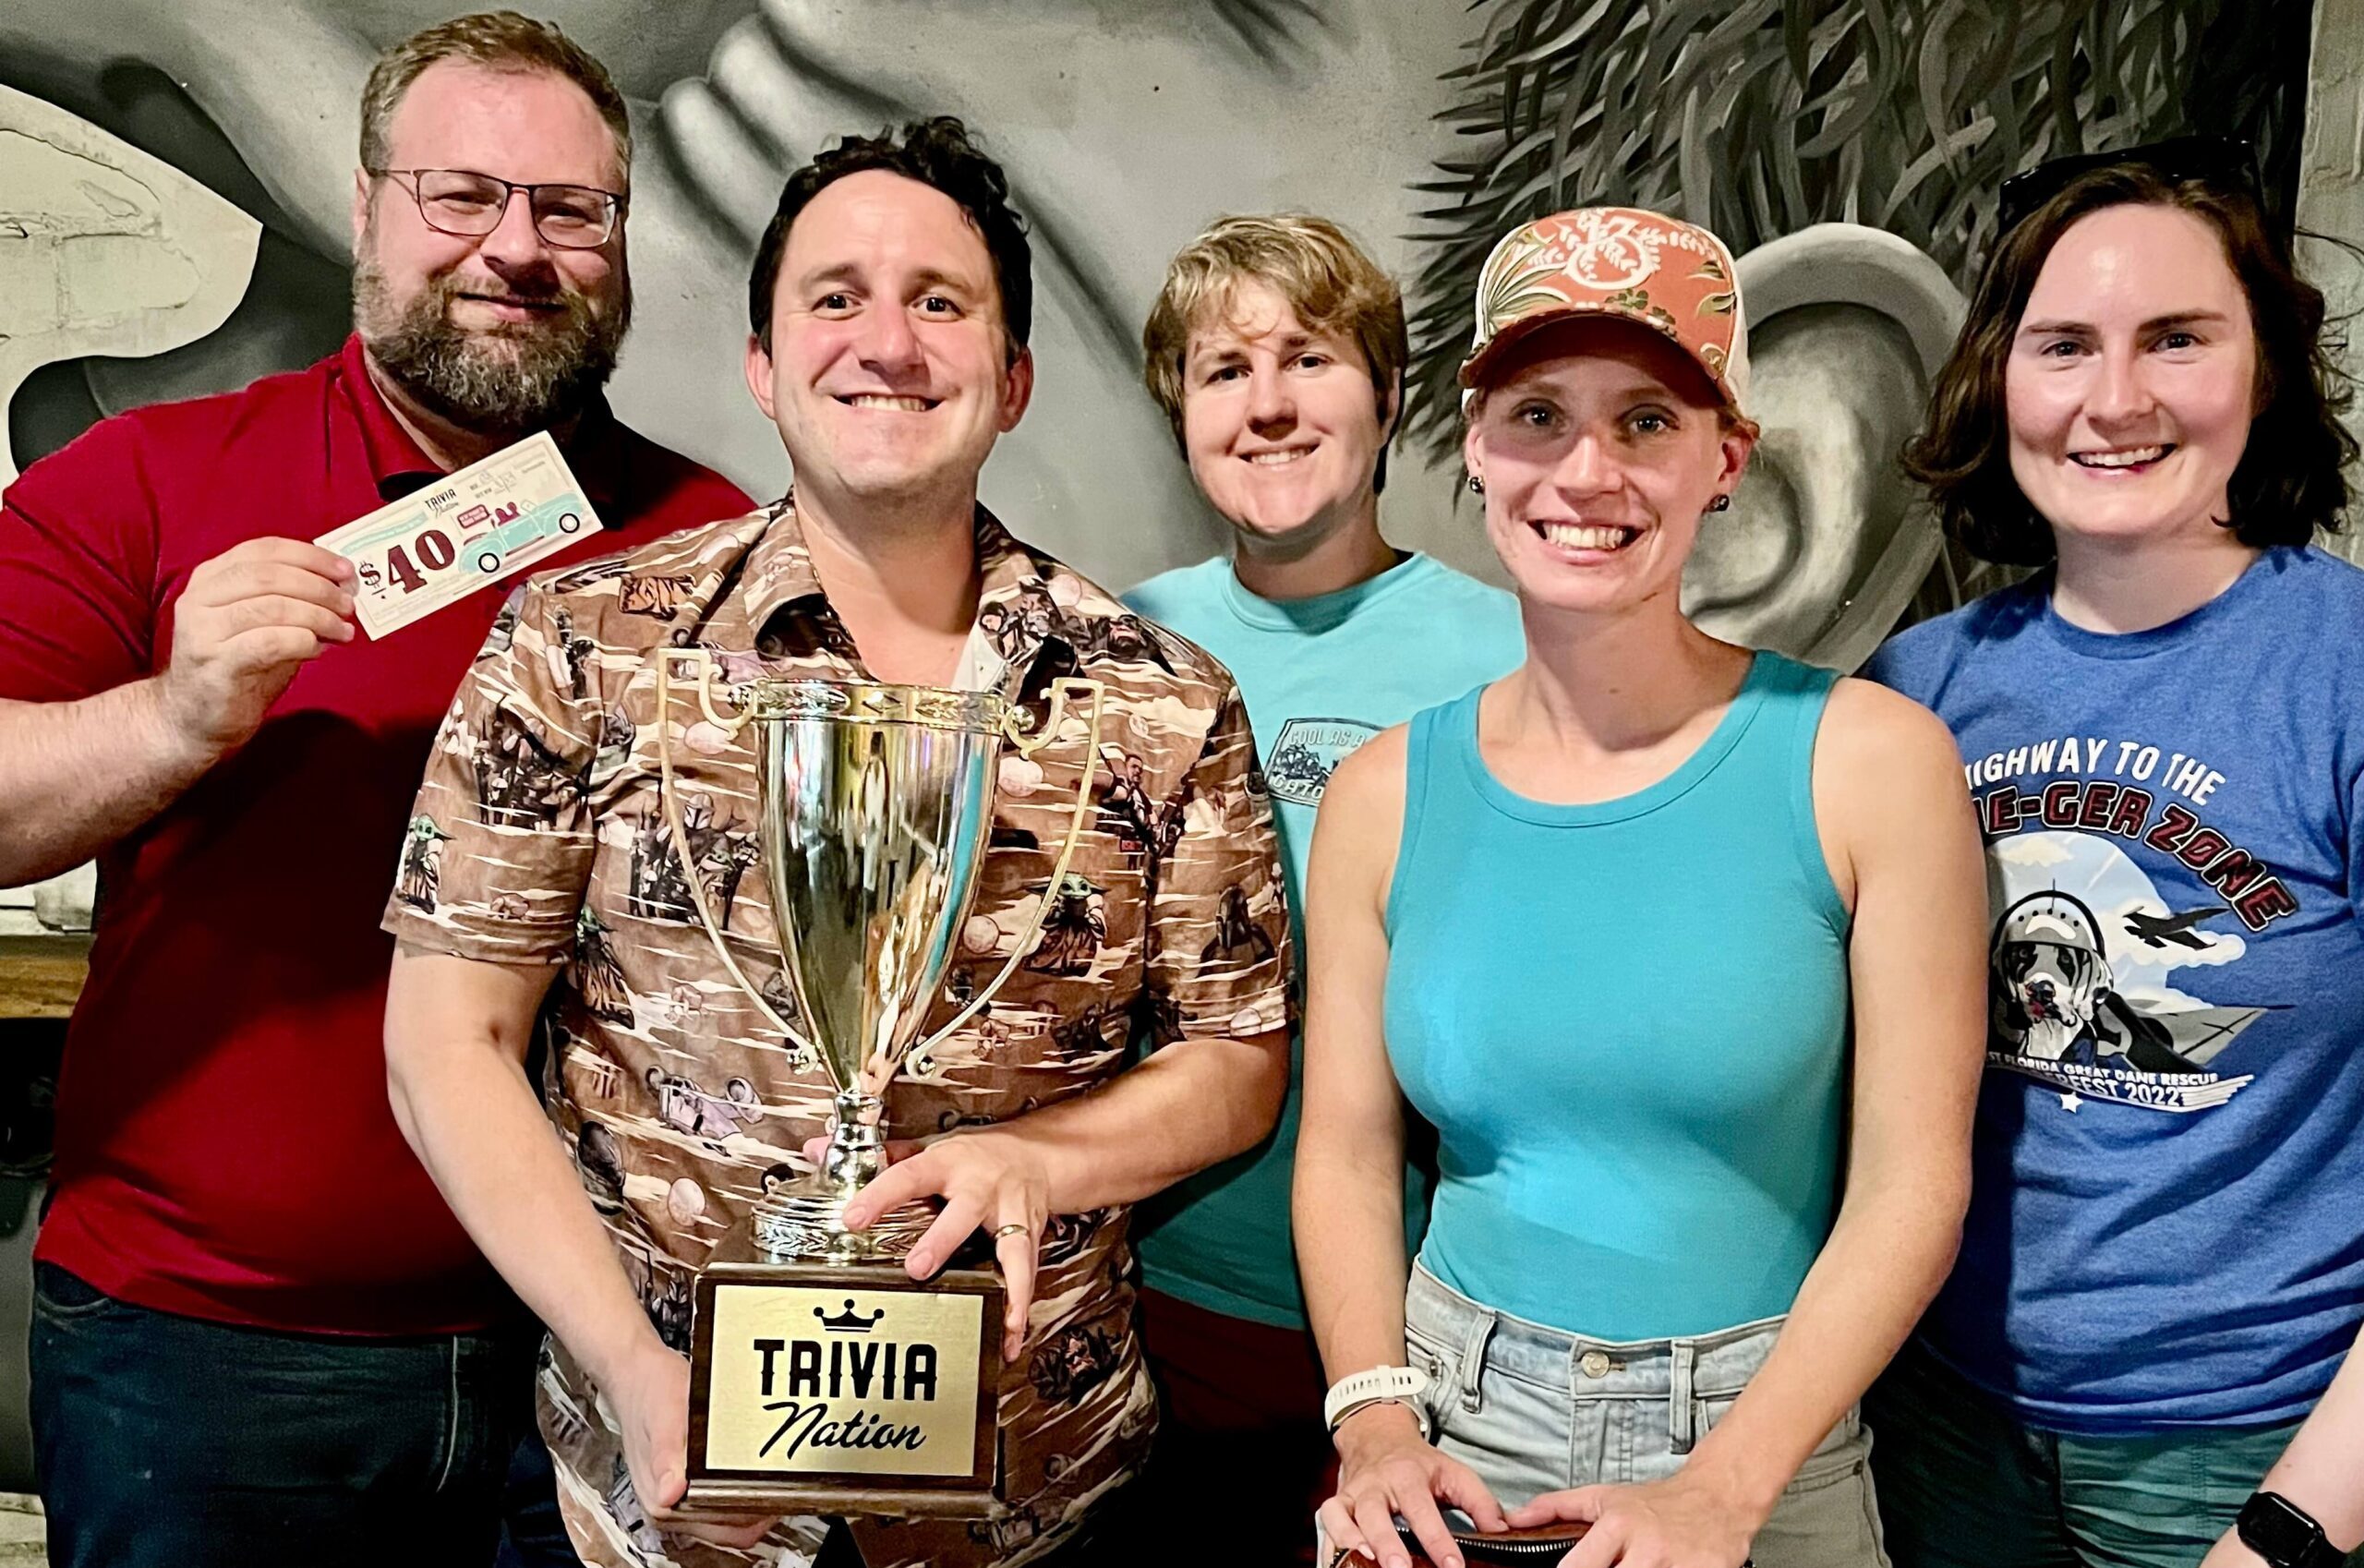 V Pizza & Sidecar Jacksonville FL 32207 trivia night: group of adults in front of a mural wall smiling with a man in front holding up a Trivia Nation trophy and a man in a red shirt behind him holding up a $40 trivia coupon